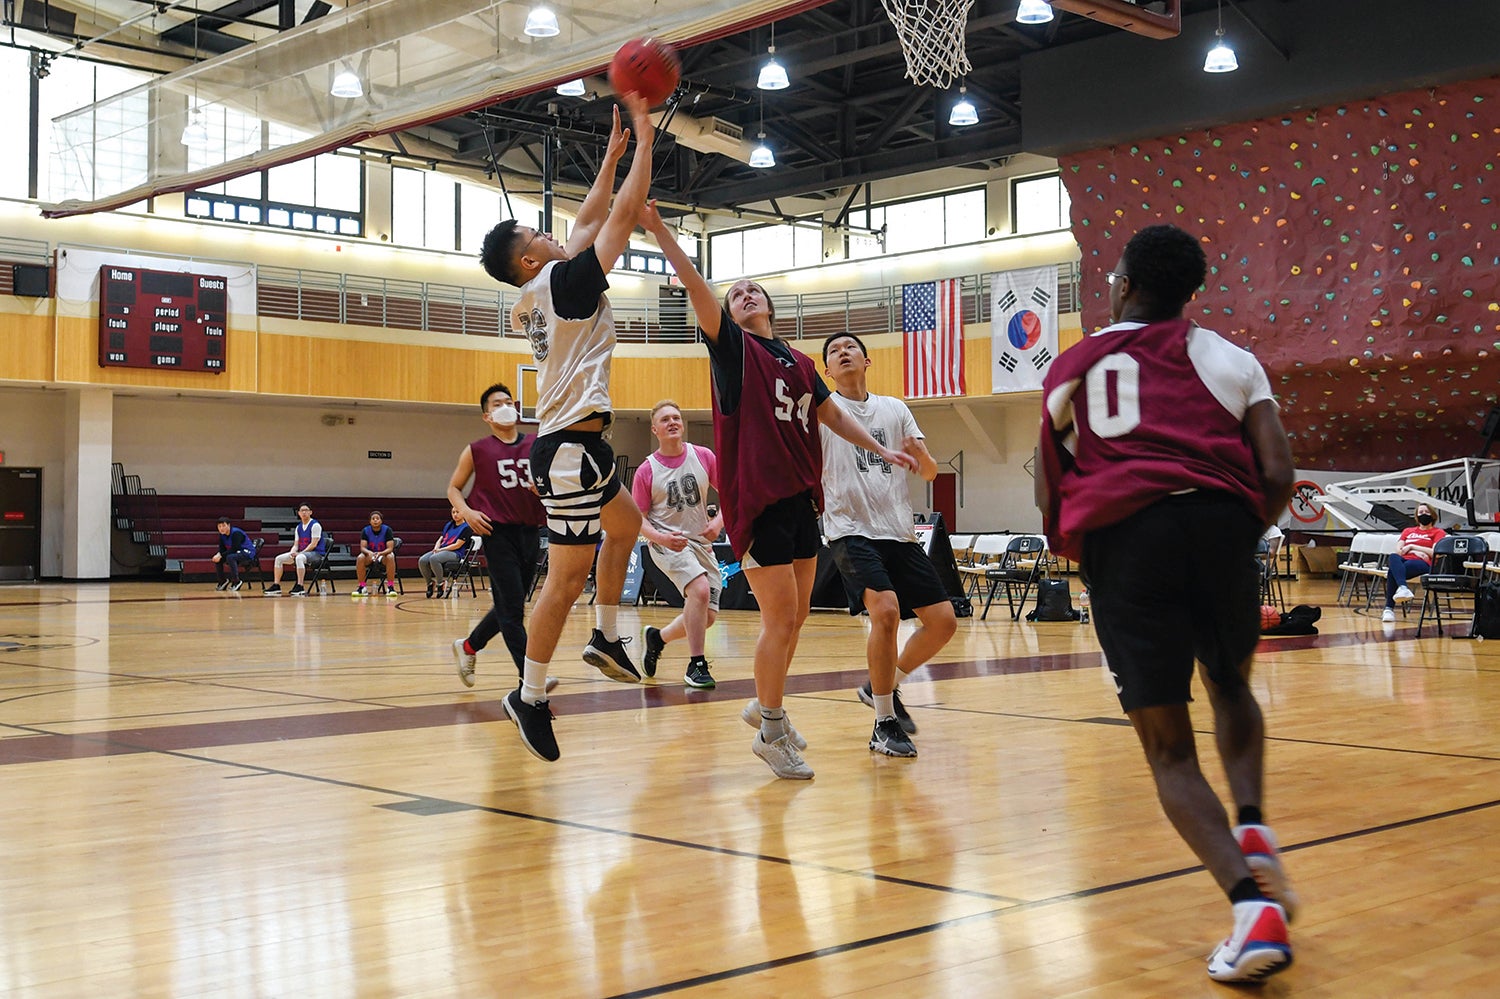 Soldiers at U.S. Army Garrison Humphreys, South Korea, play in a Better Opportunities for Single Soldiers basketball tournament. (Credit: U.S. Army/Spc. Brooke Davis).